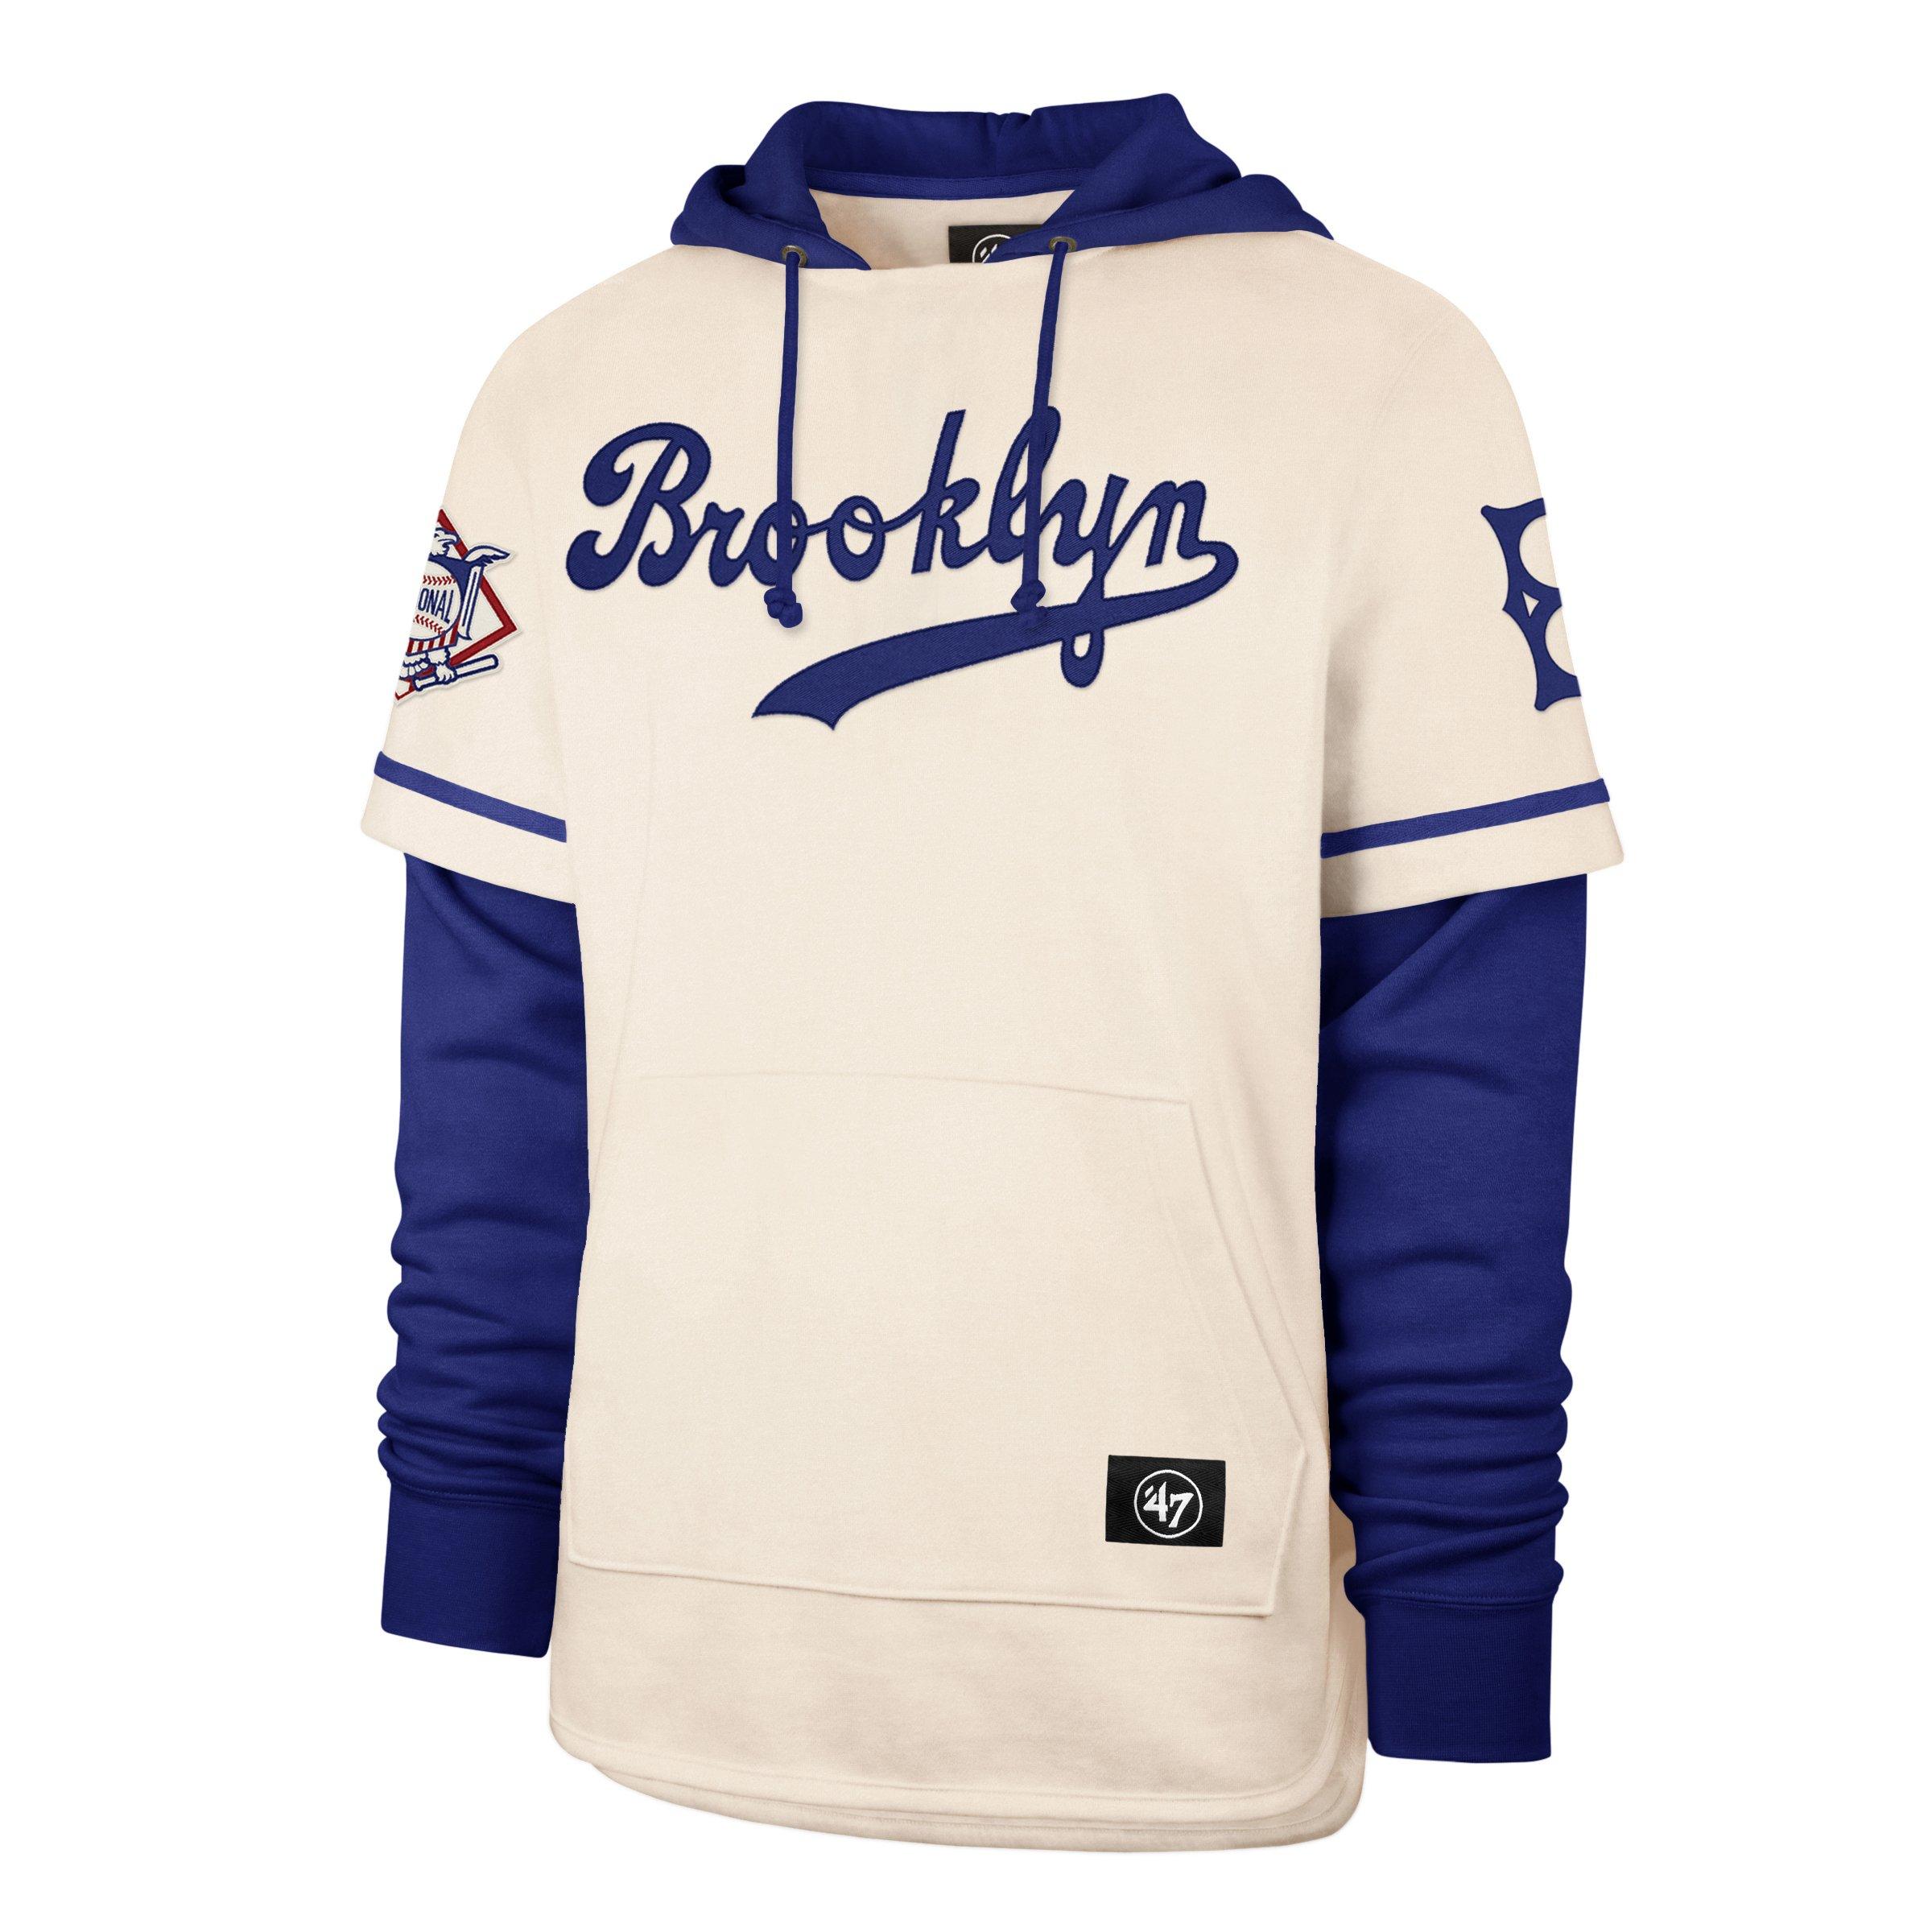 Here's To You Mr. Robinson Brooklyn Dodgers shirt, hoodie, sweater, long  sleeve and tank top